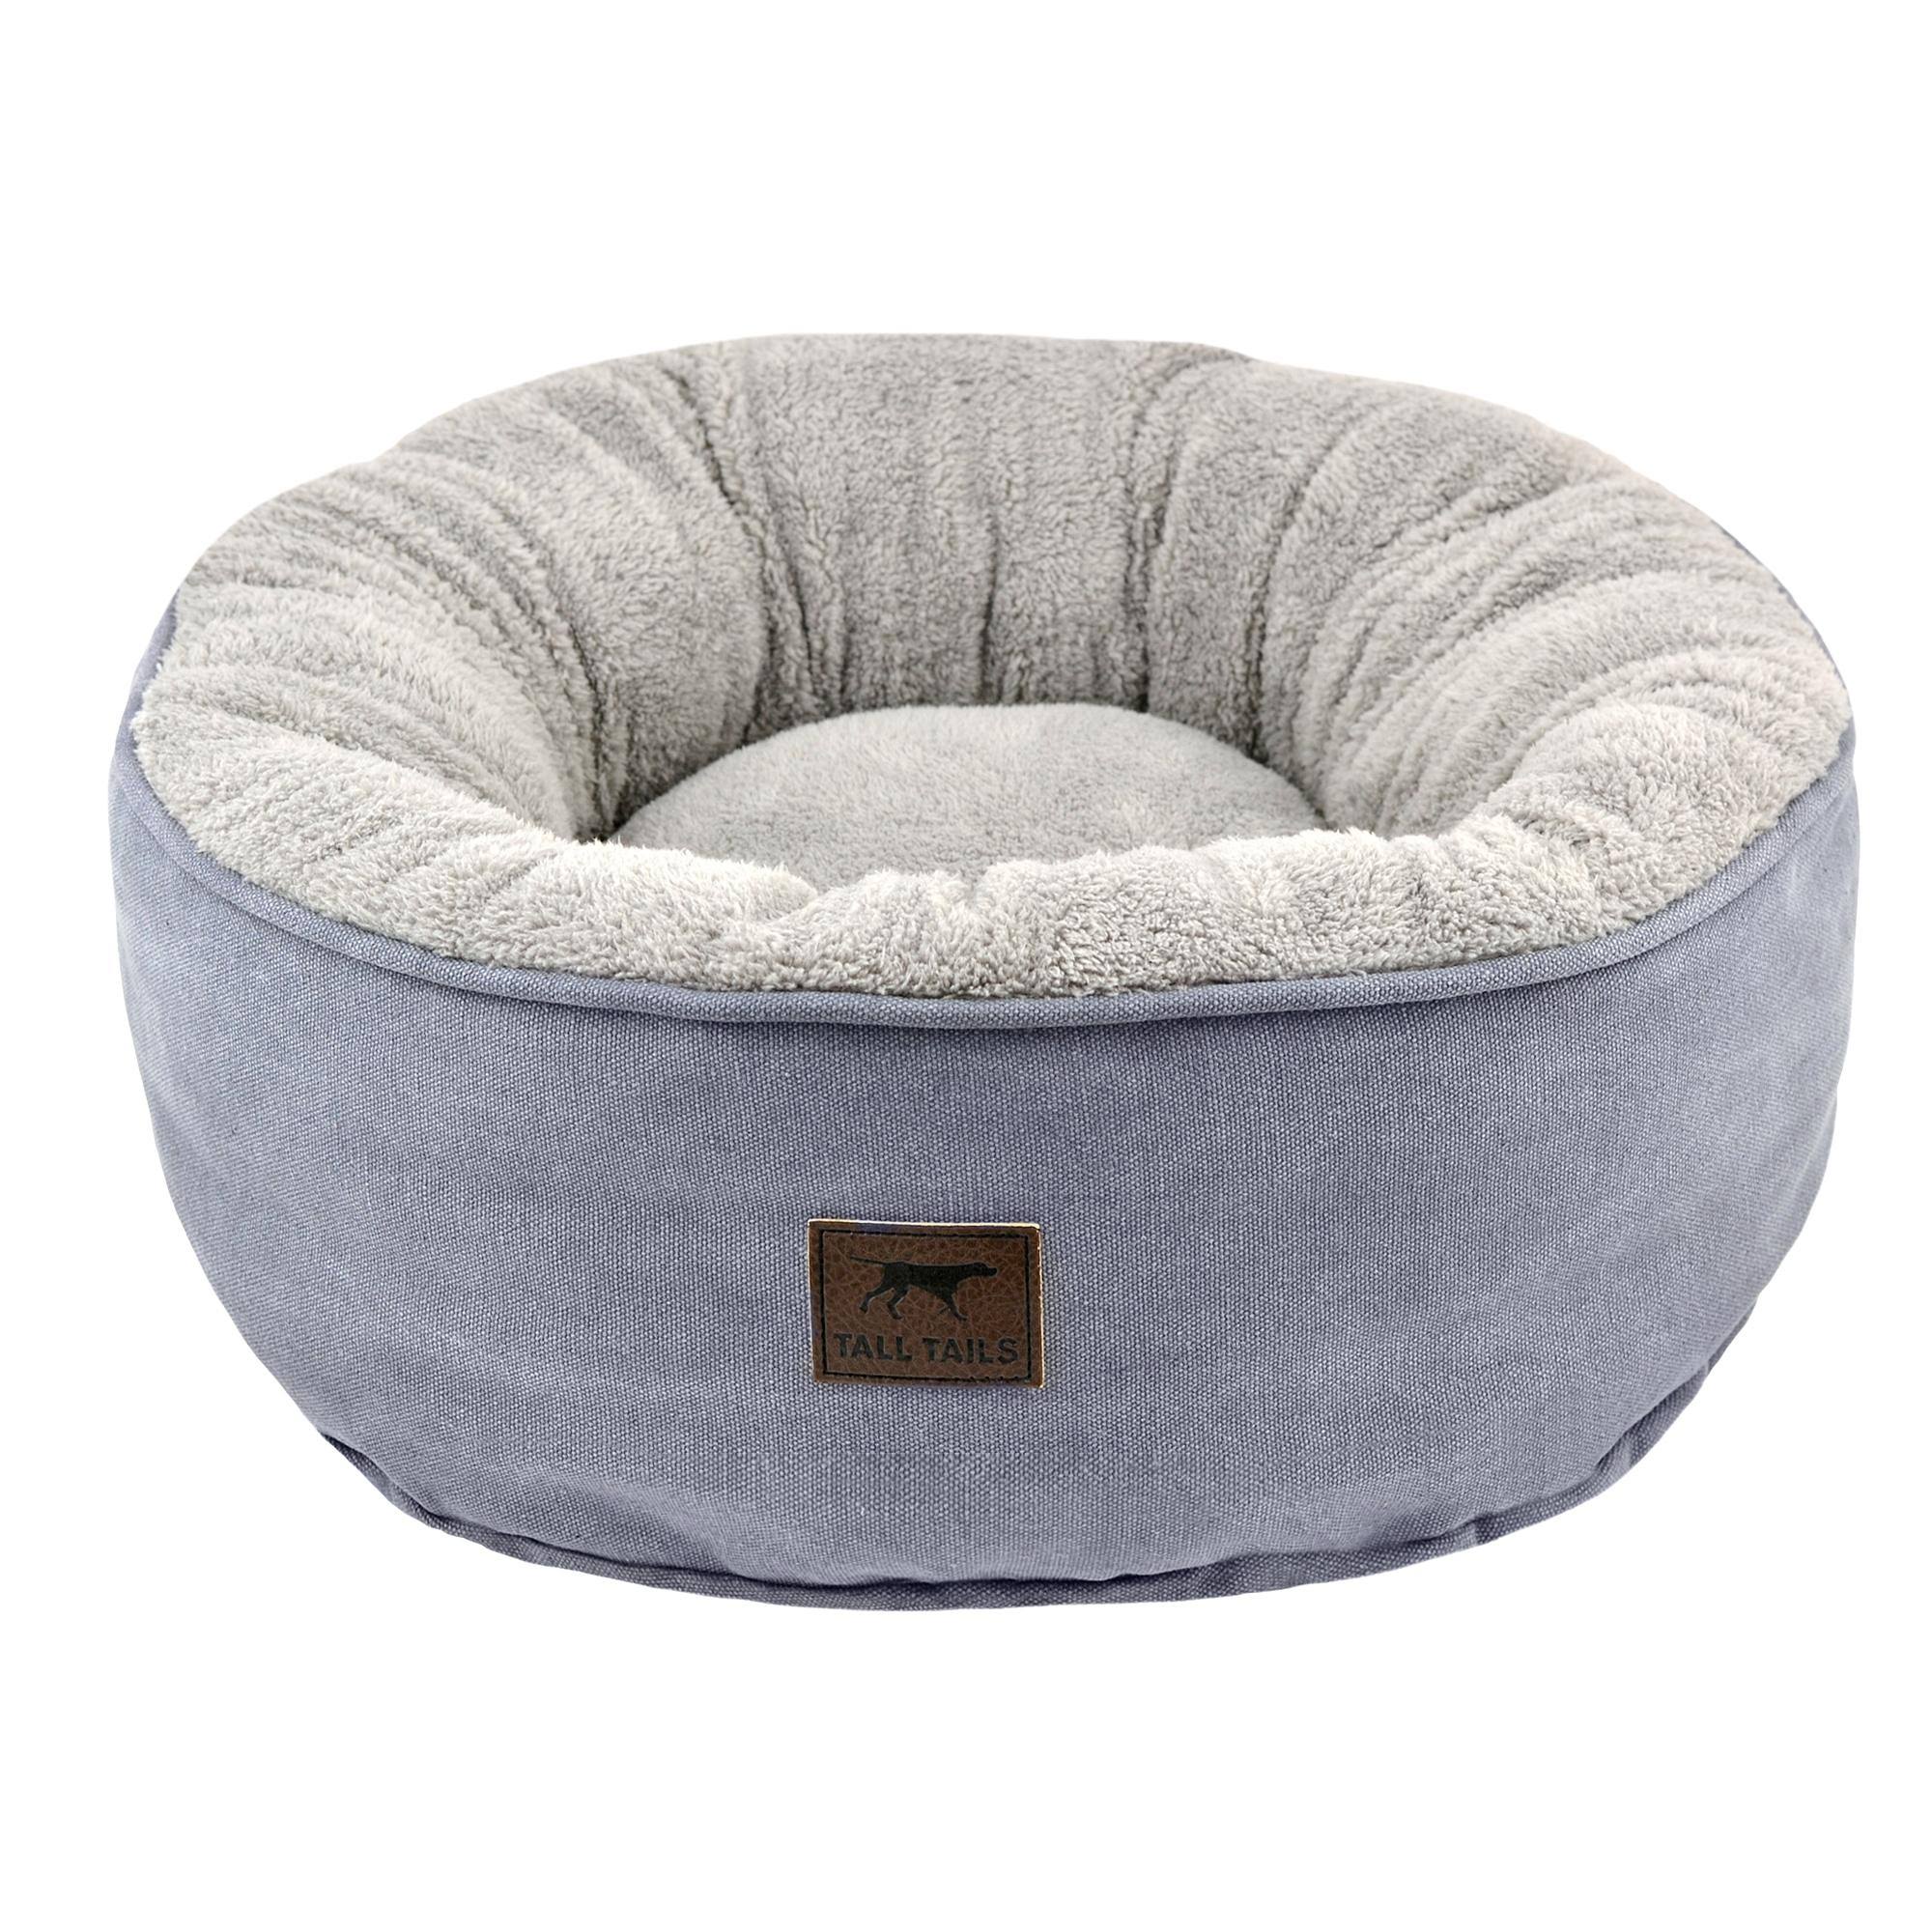 Tall Tails Dream Chaser Charcoal Donut Bed